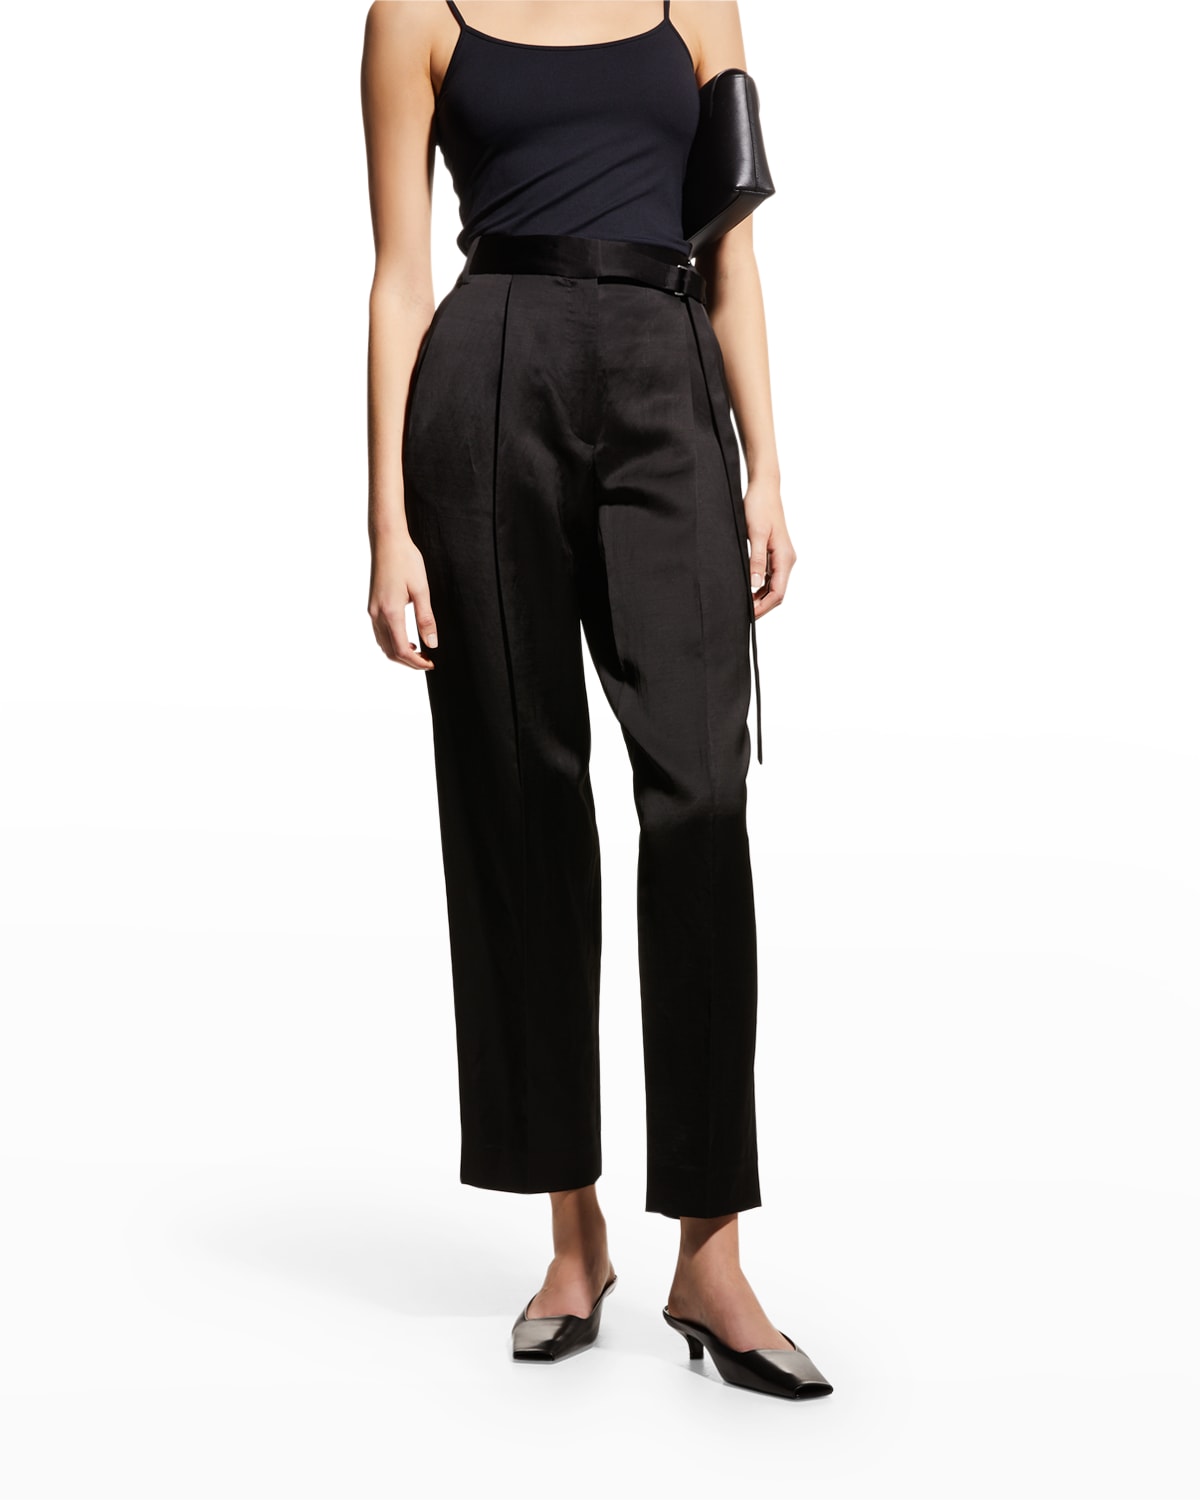 PARTOW Ava Belted Straight-Leg Ankle Pants